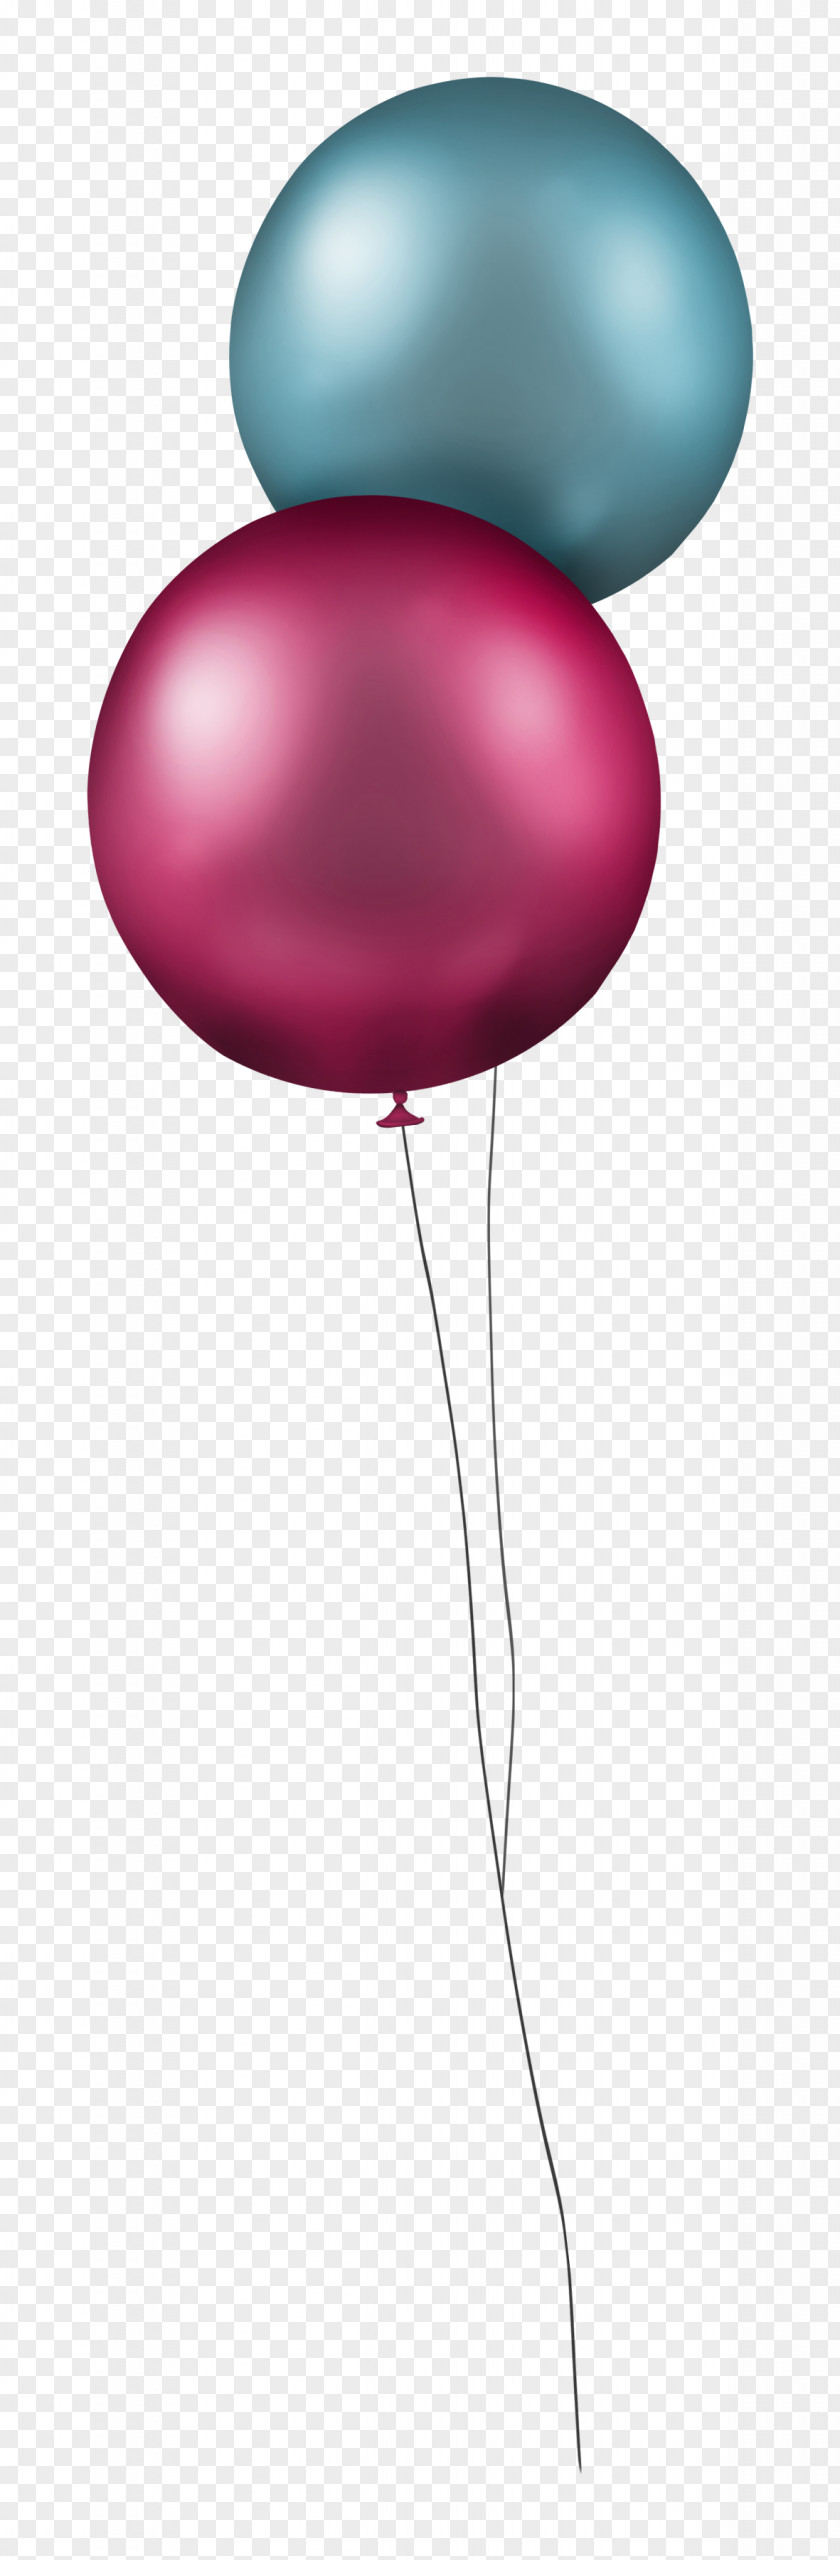 Two Balloons Balloon Icon PNG